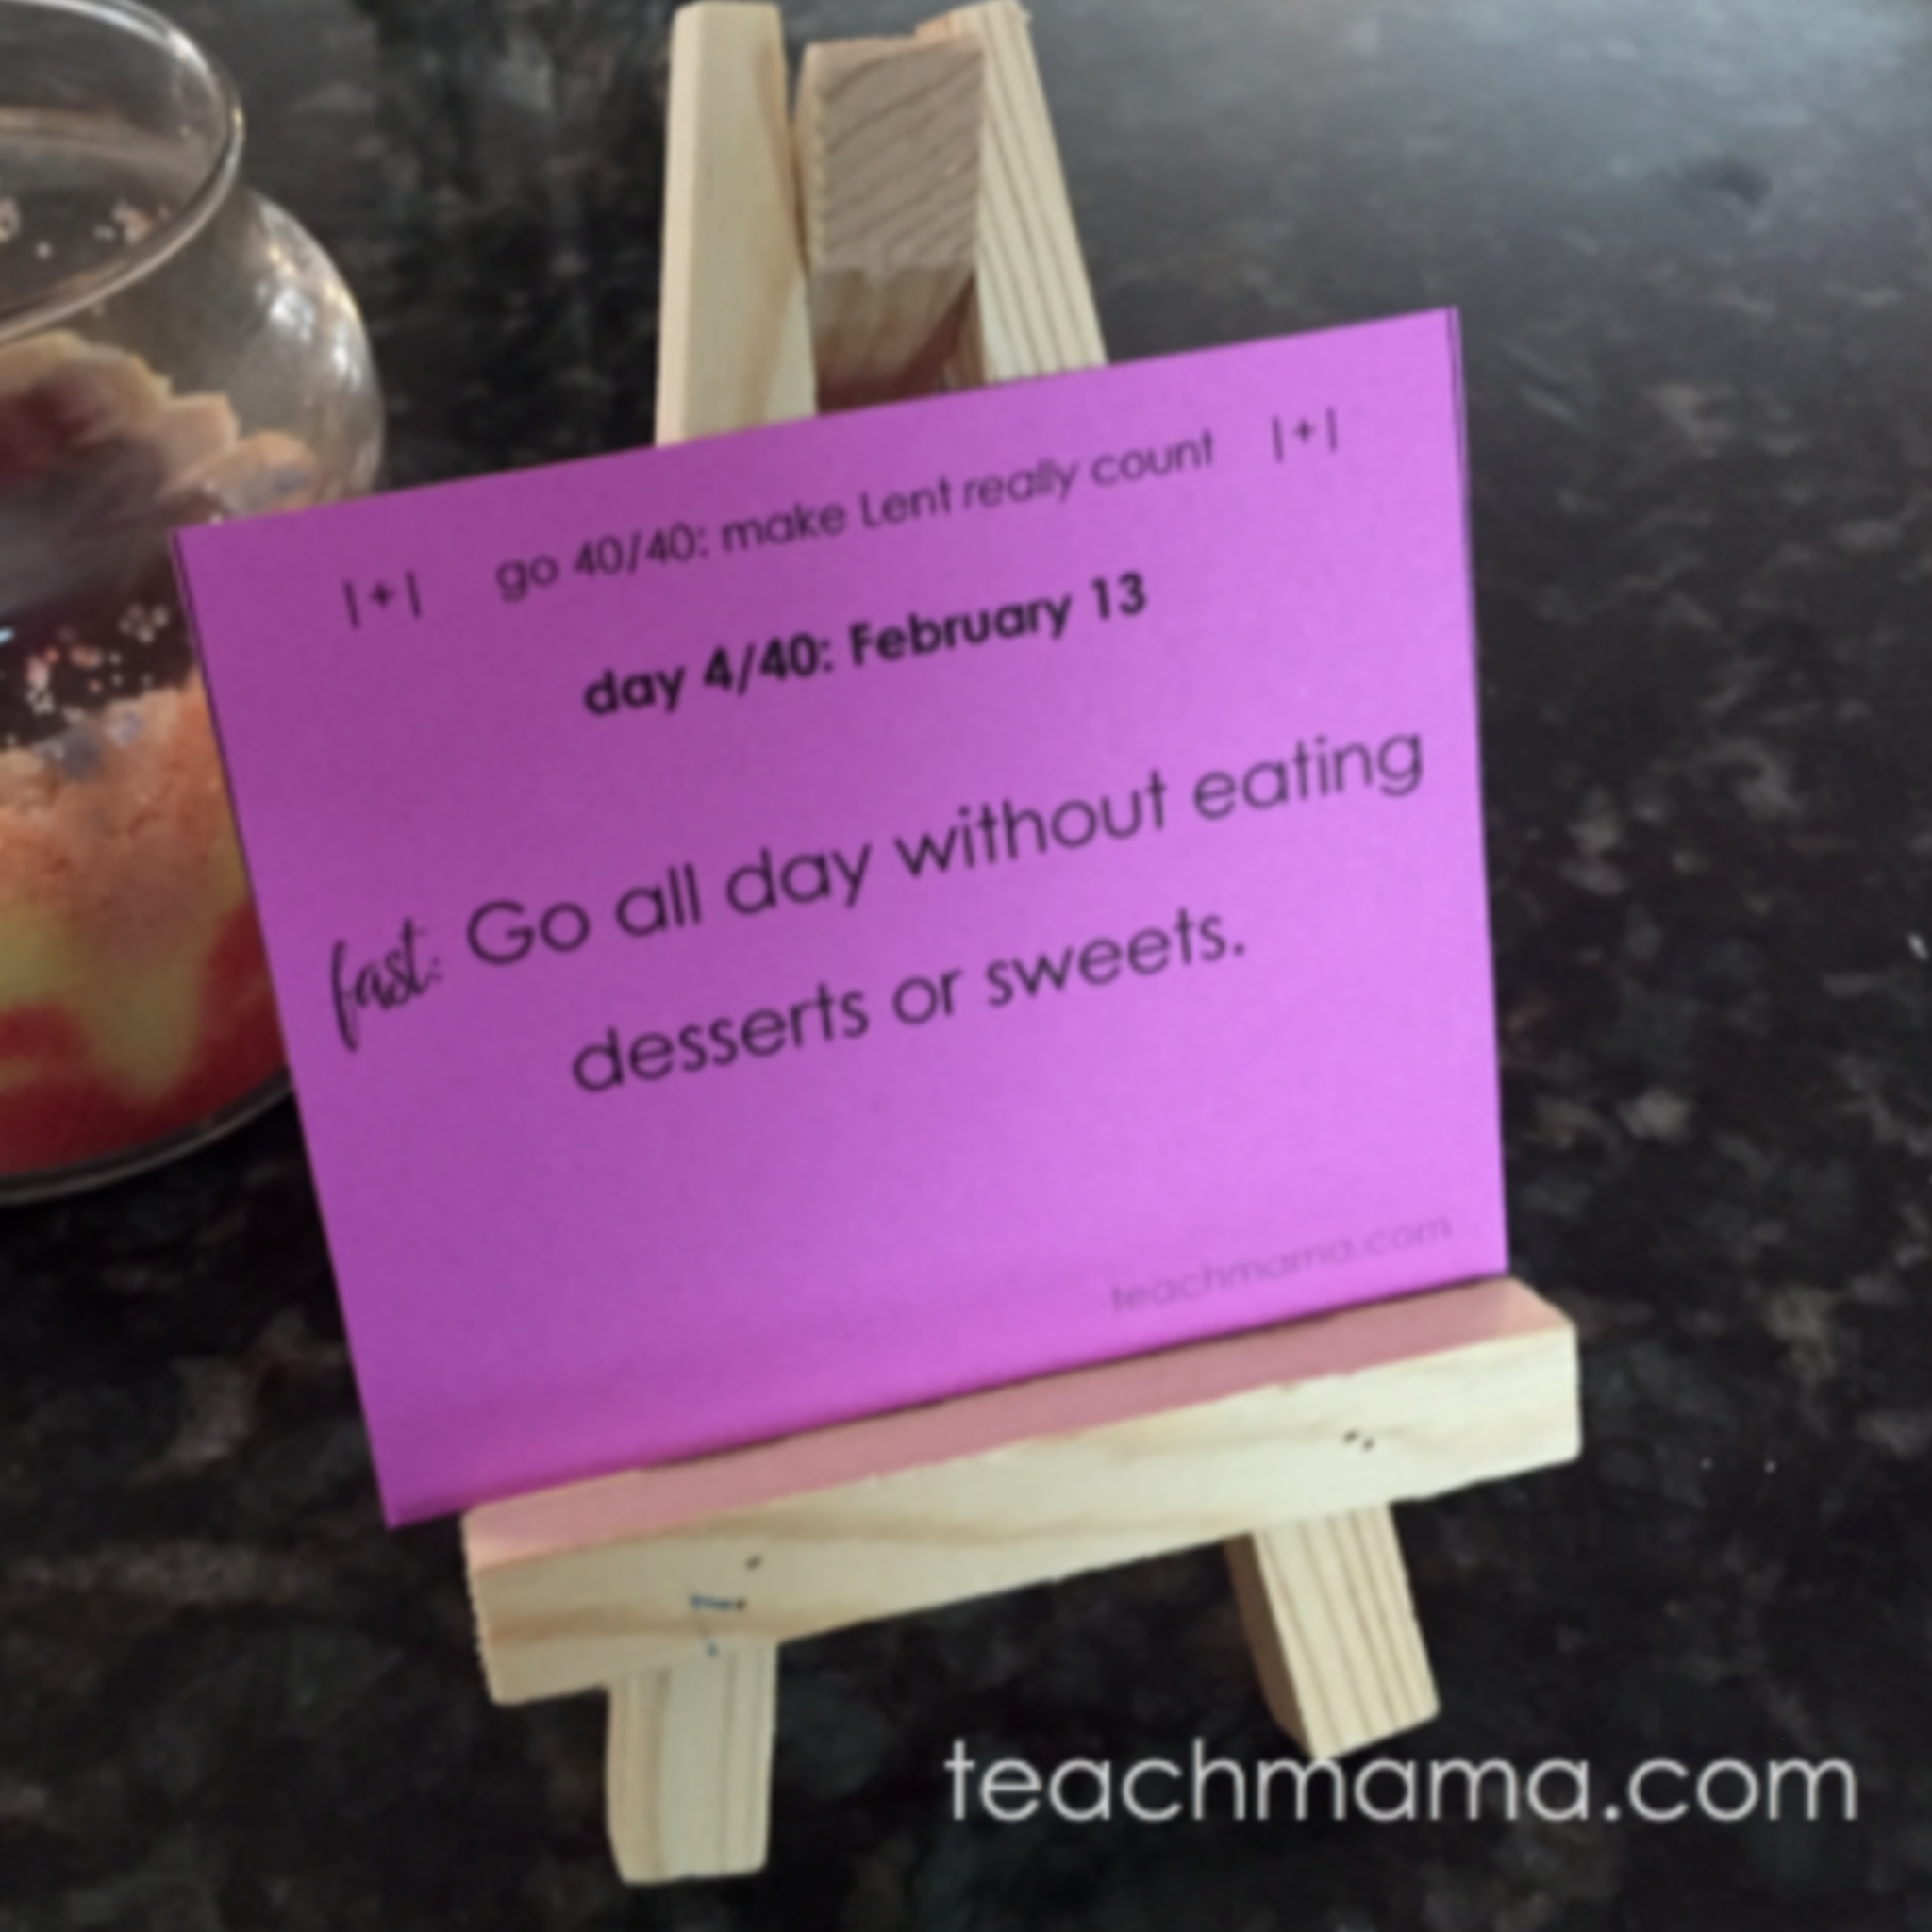 Download lent for modern catholic kids cards, 2019 - teach mama